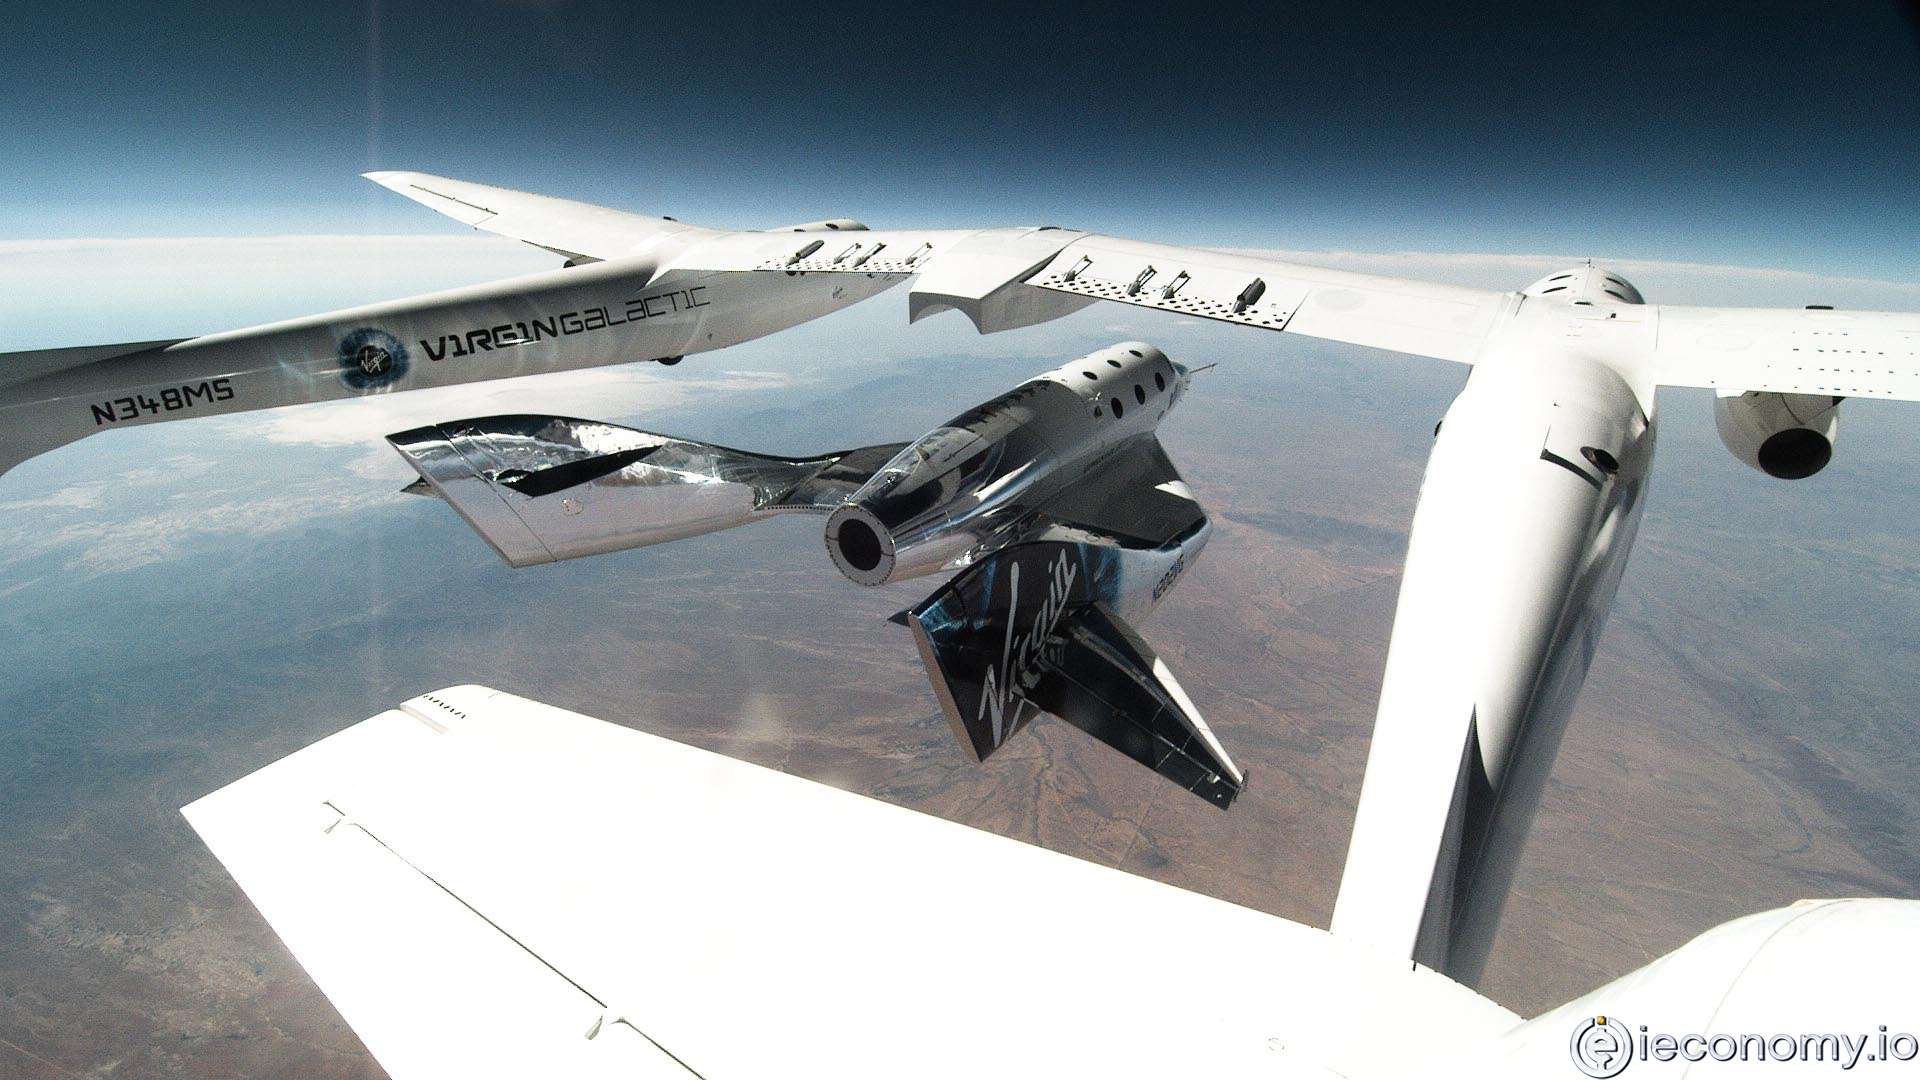 Virgin Galactic is allowed to fly tourists into space